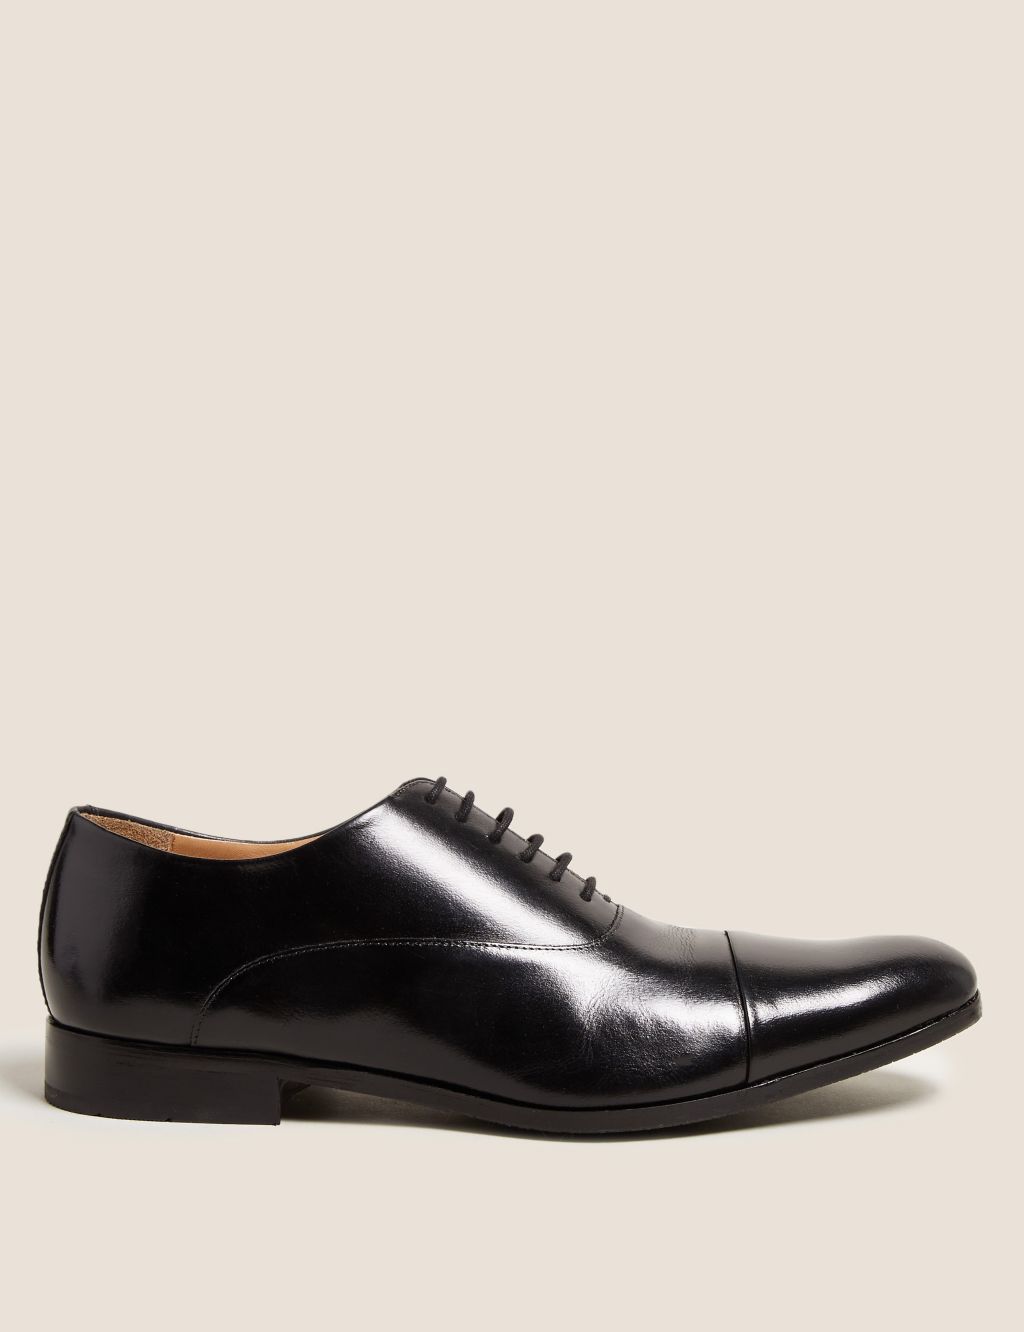 Leather Oxford Shoes image 1